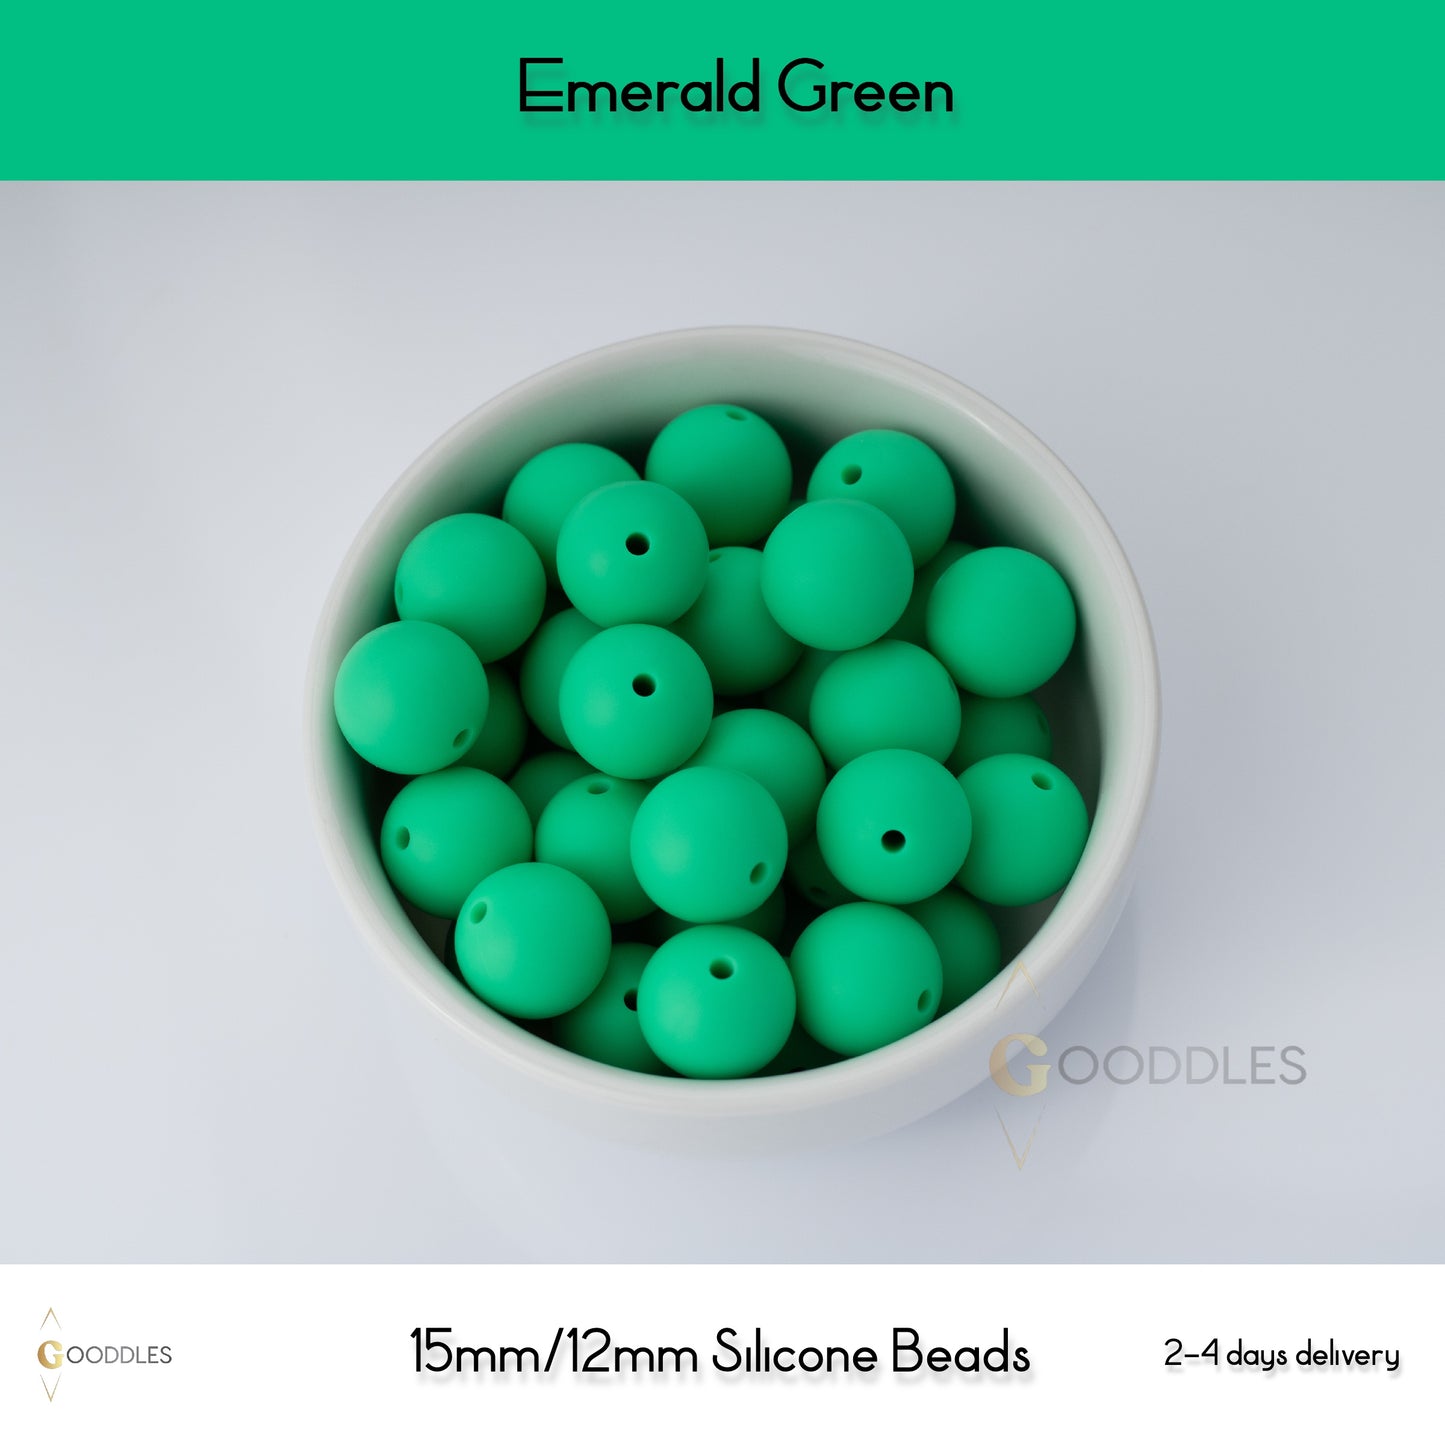 5pcs, Emerald Green Silicone Beads Round Silicone Beads